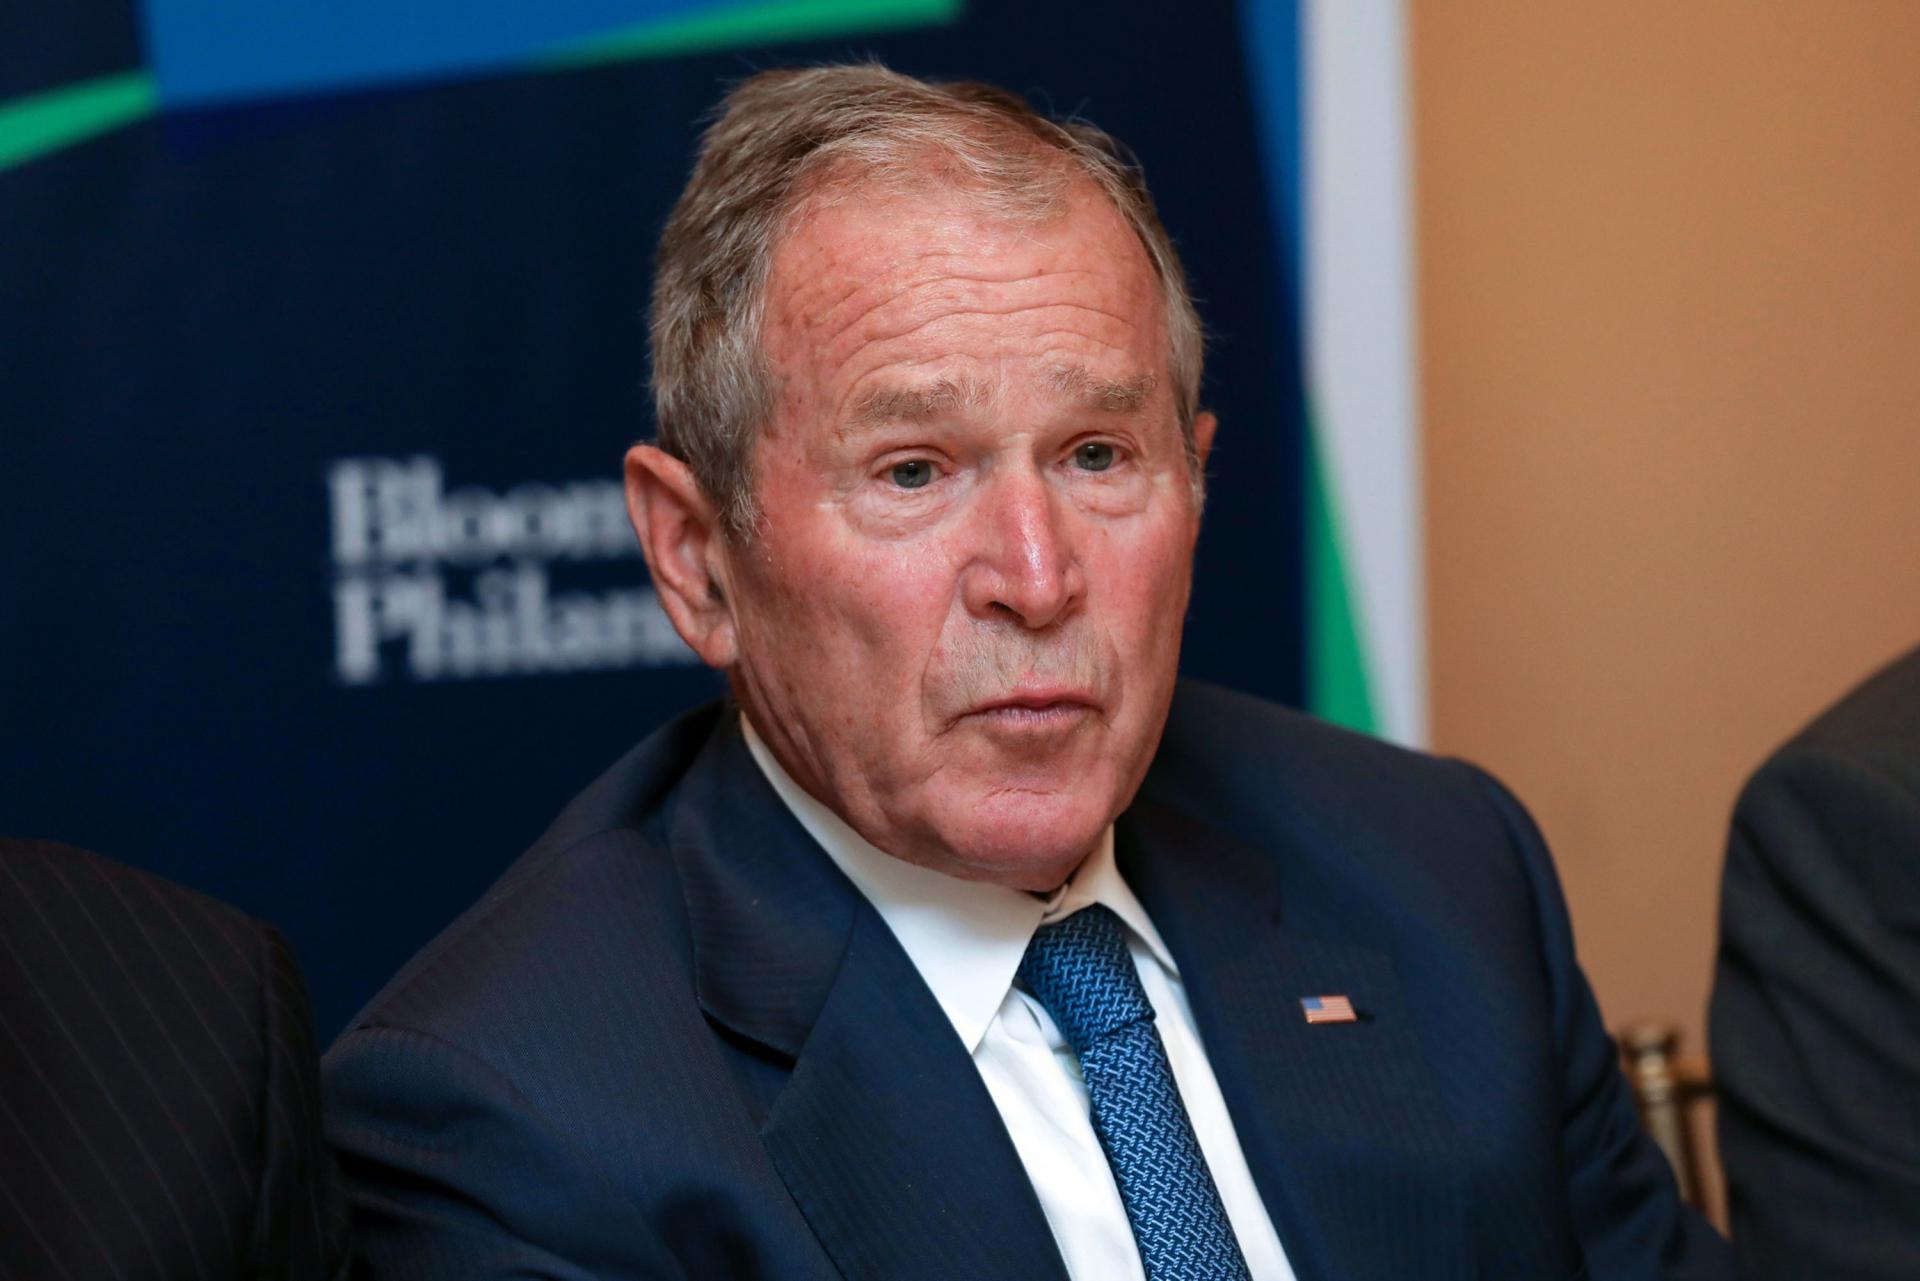 FBI: The assassination attempt was in retaliation against Bush for the invasion of Iraq